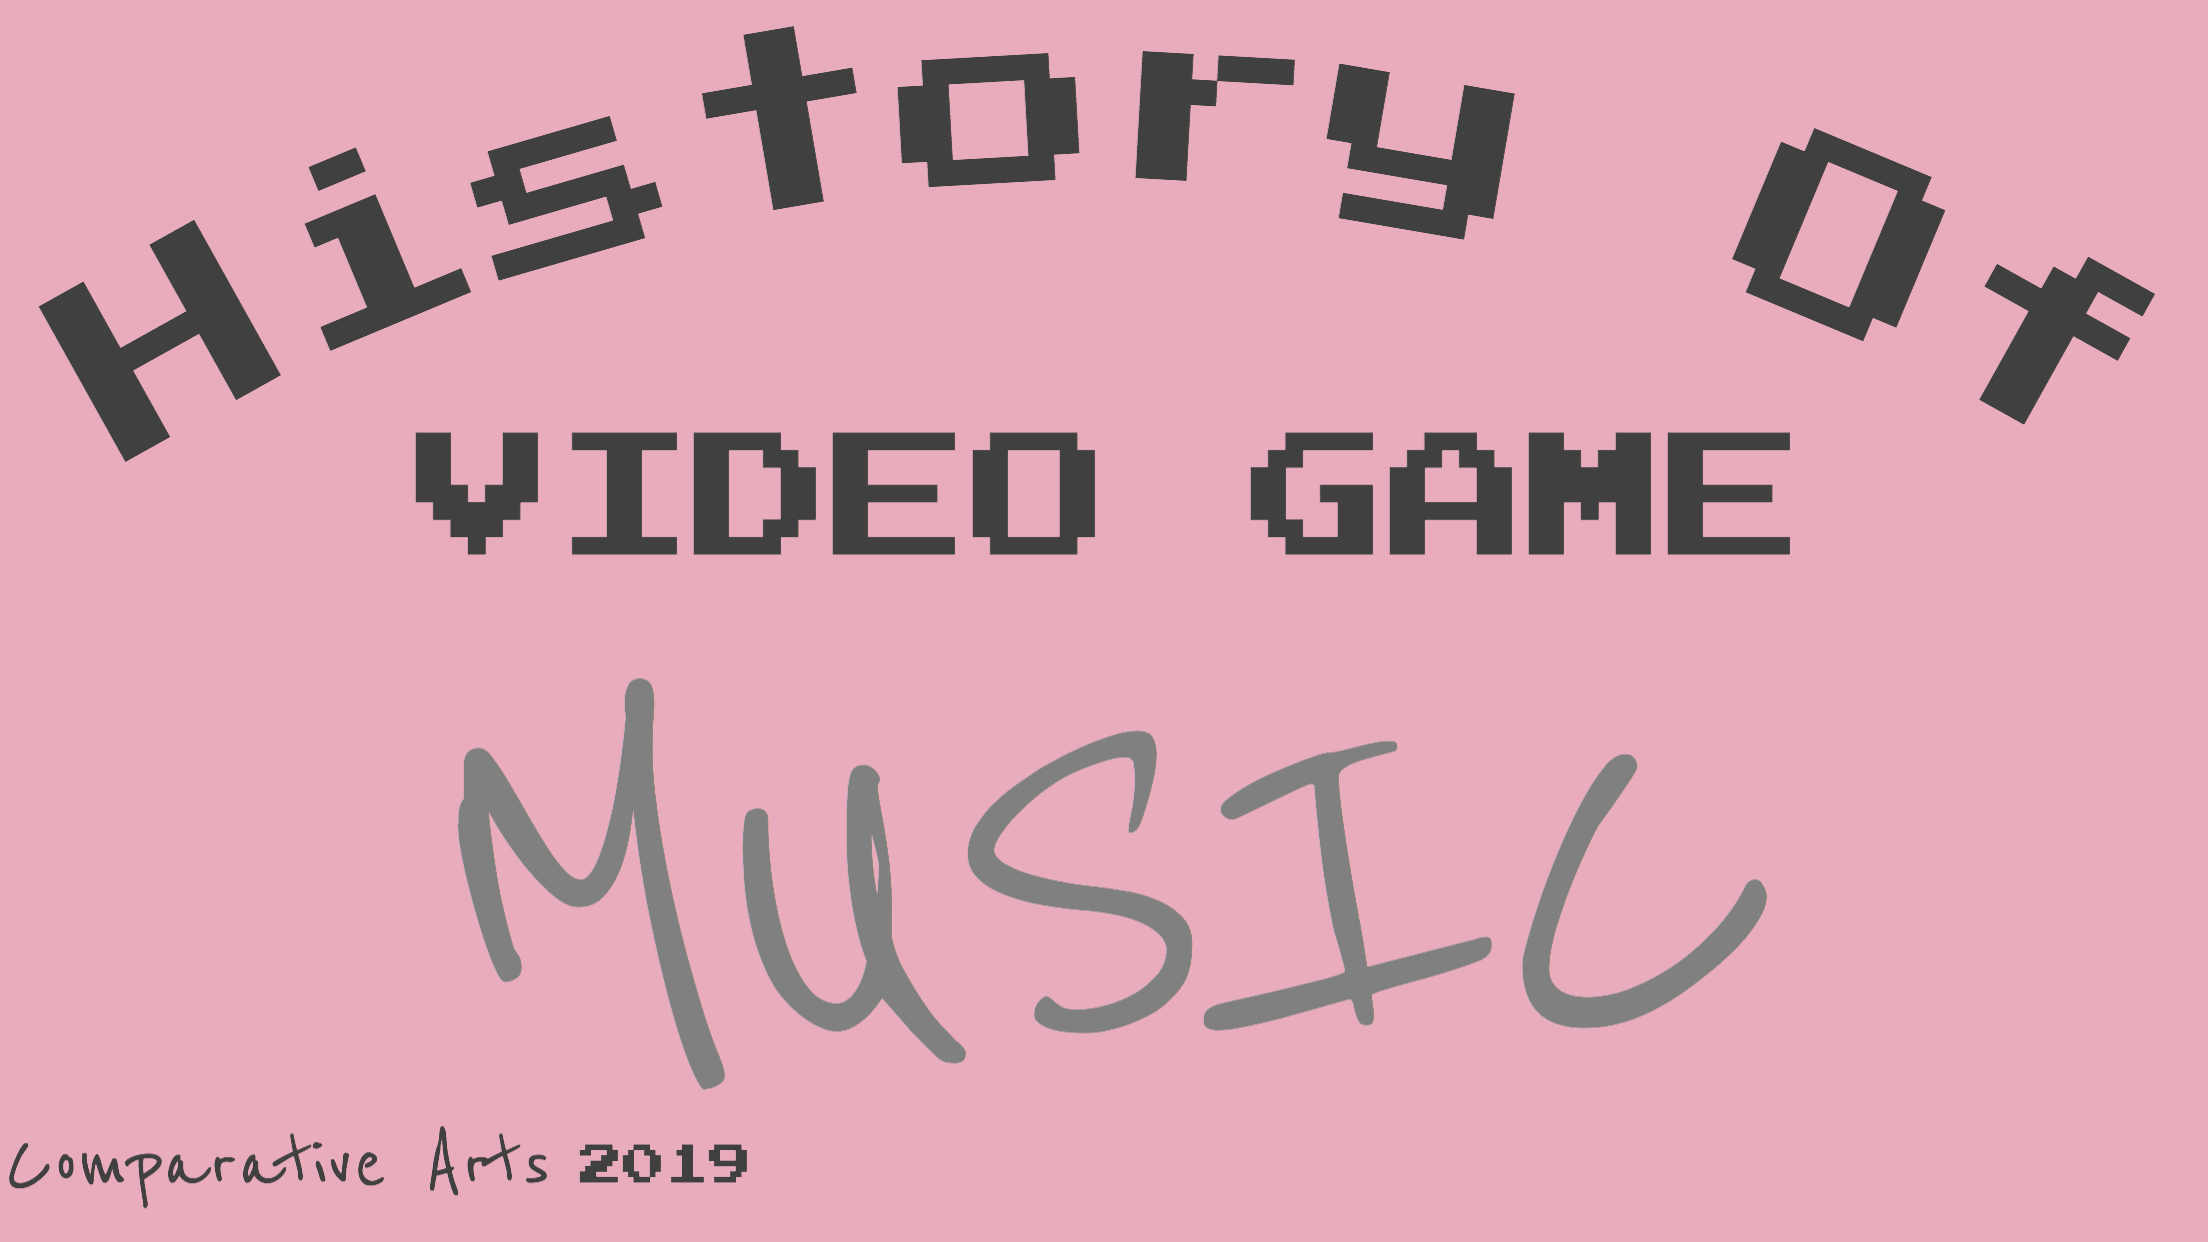 Music in Video Games, A Comparative Arts Project